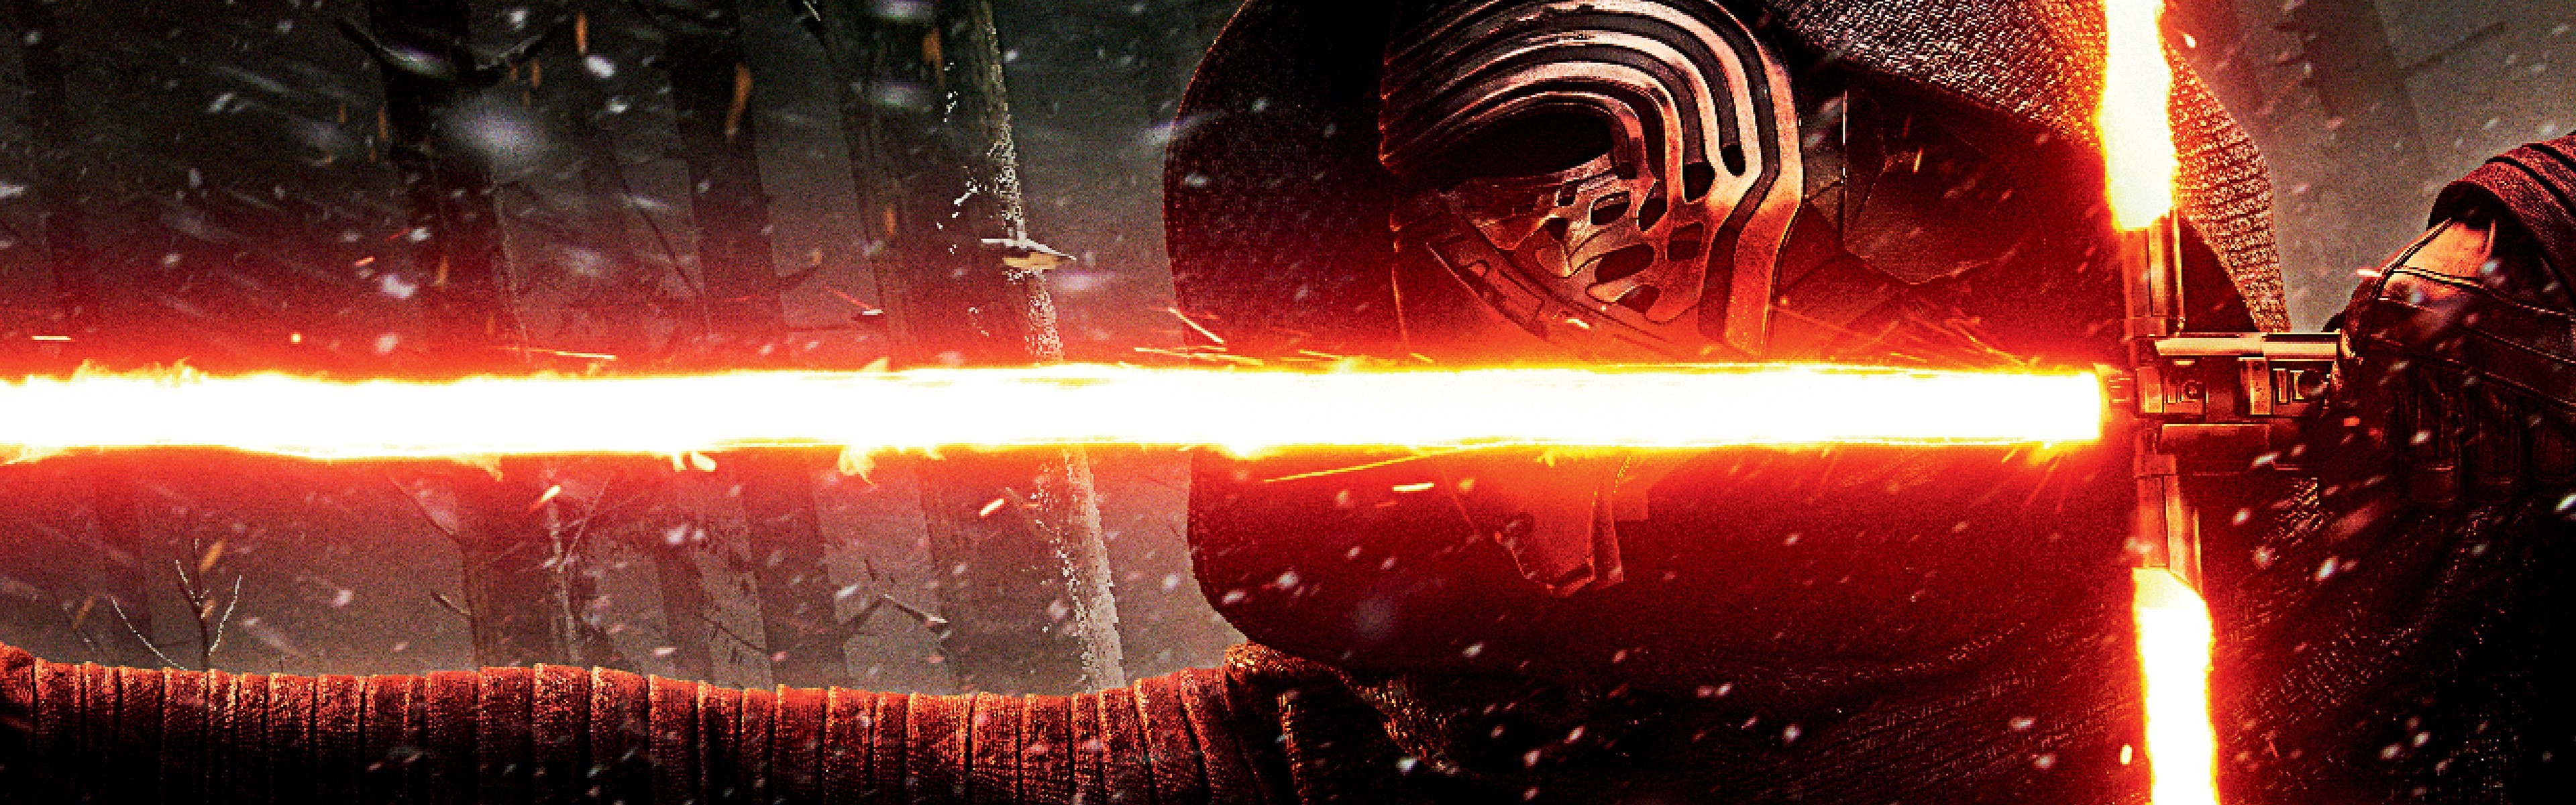 Kylo Ren, Lightsaber, Star Wars The Force Awakens, Movies Wallpapers HD / Desktop and Mobile Backgrounds